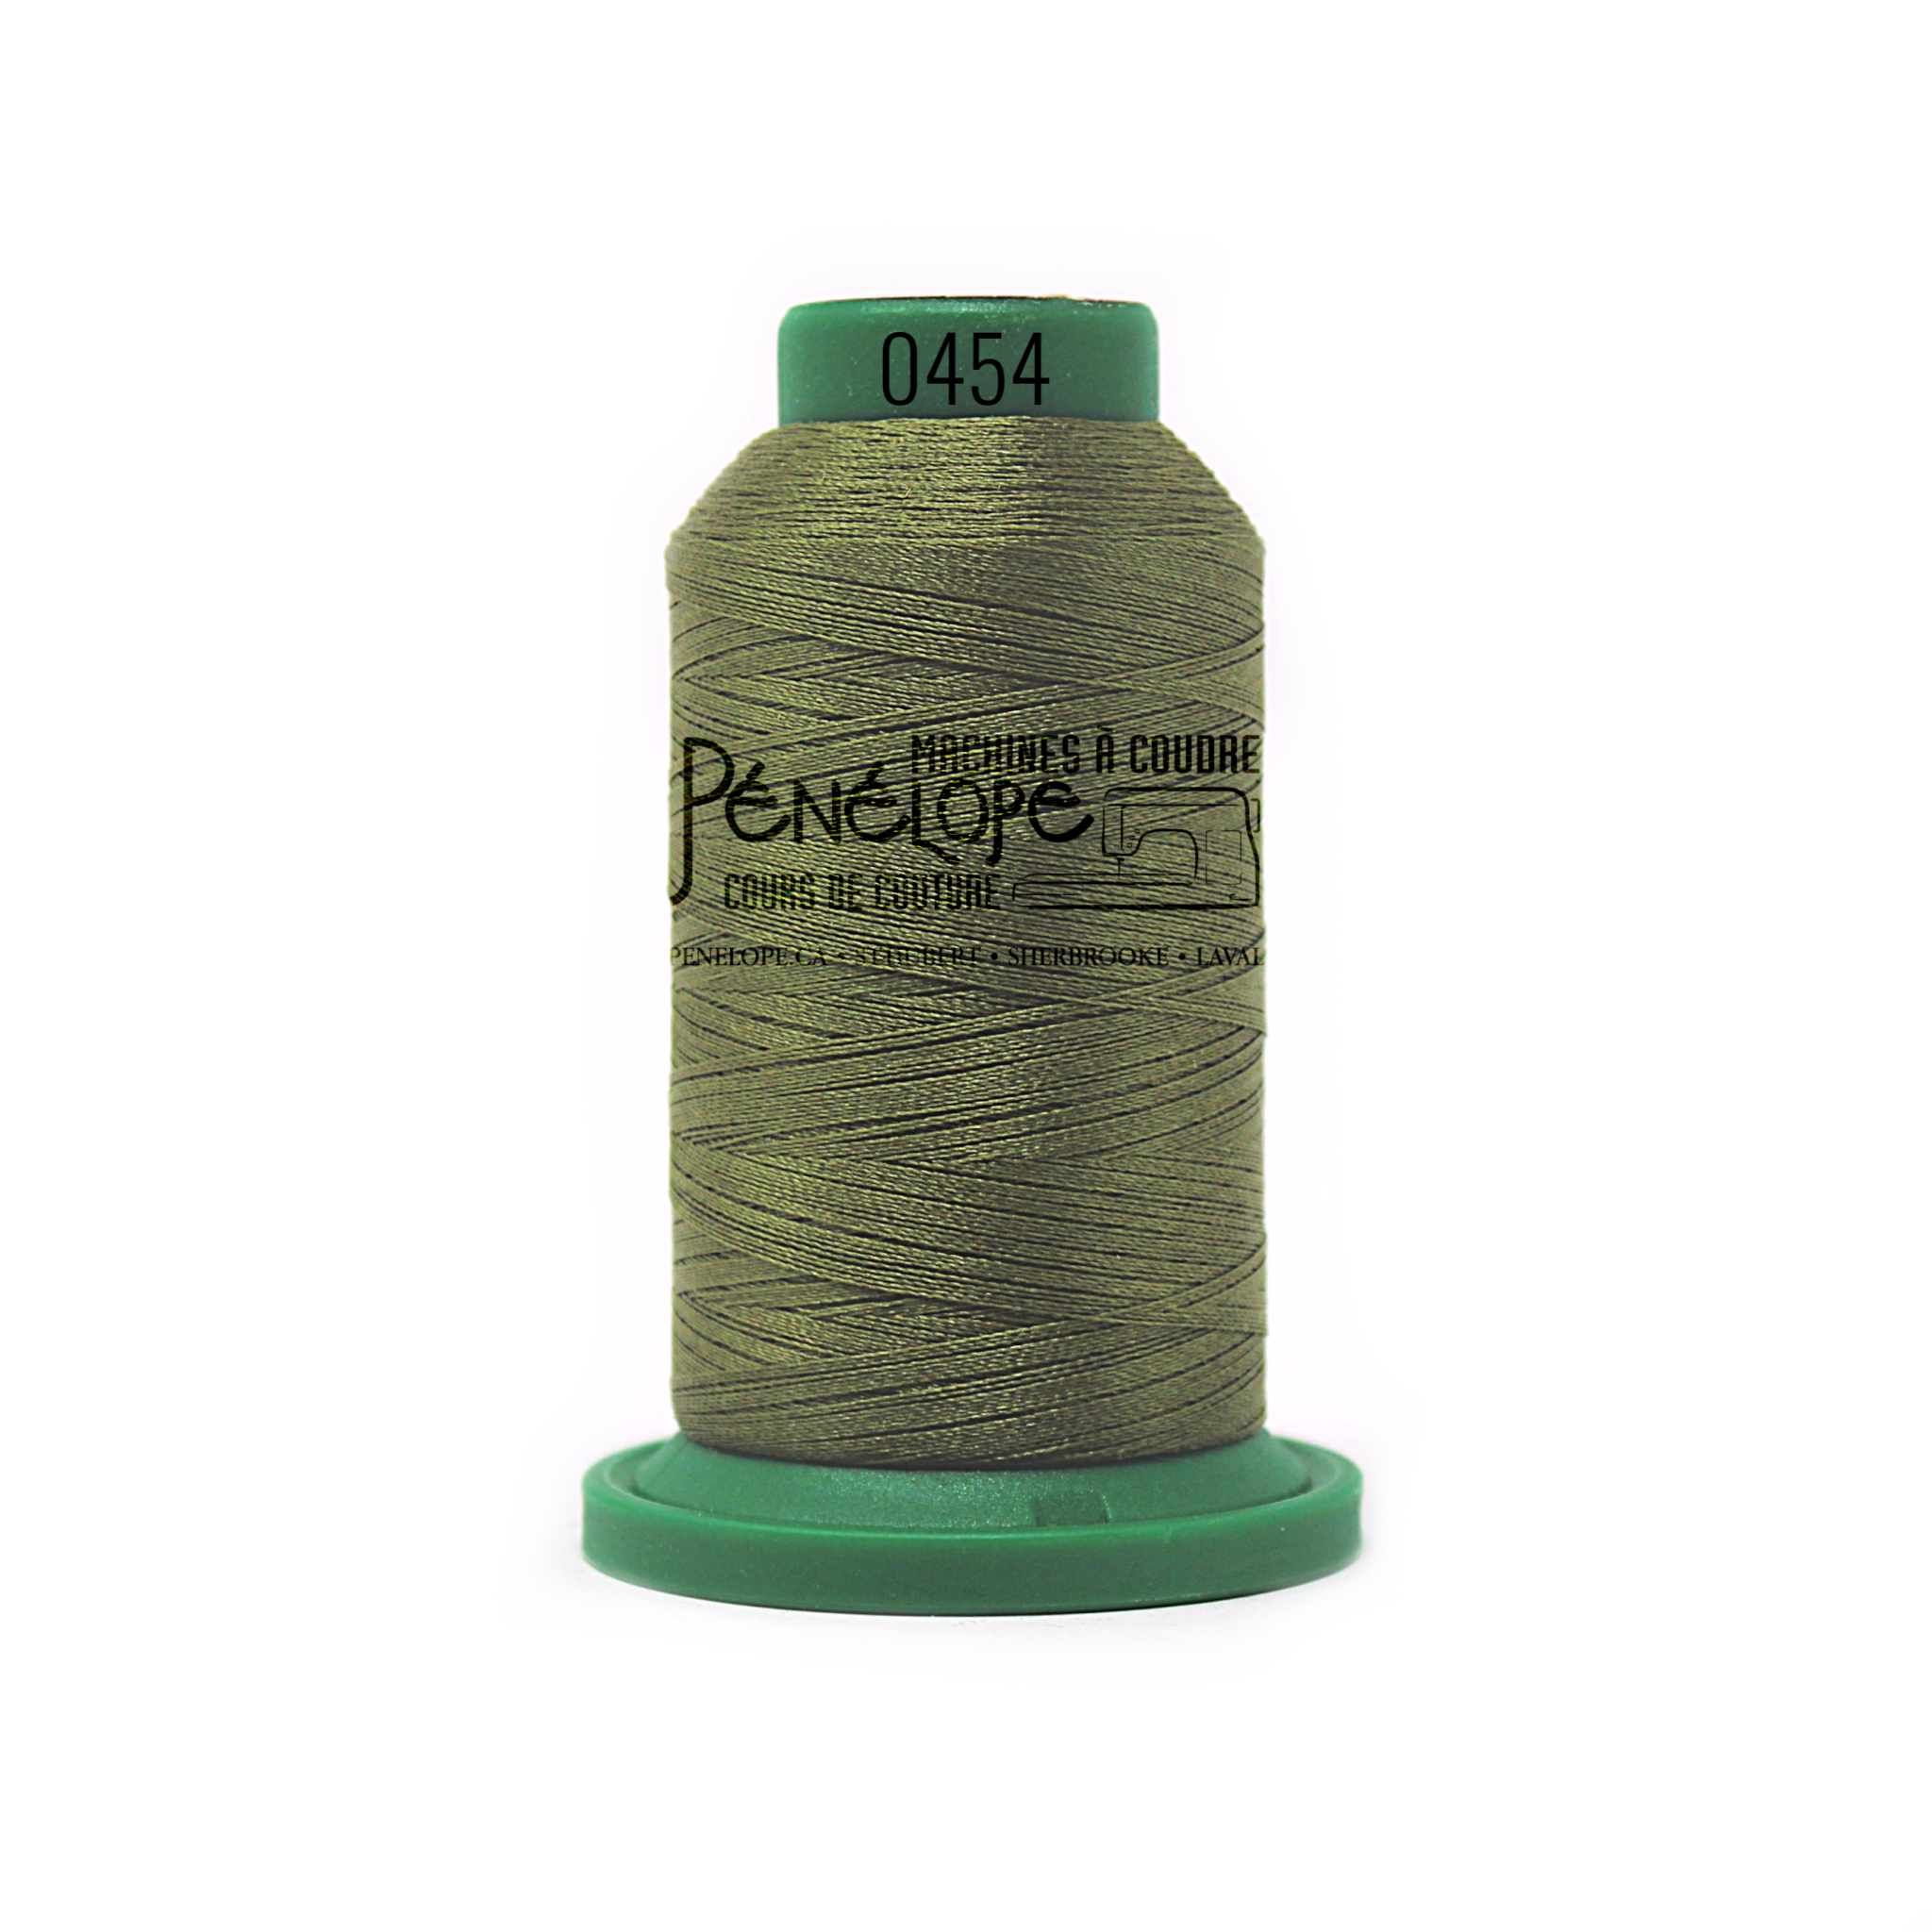 Isacord Isacord sewing and embroidery thread 0454